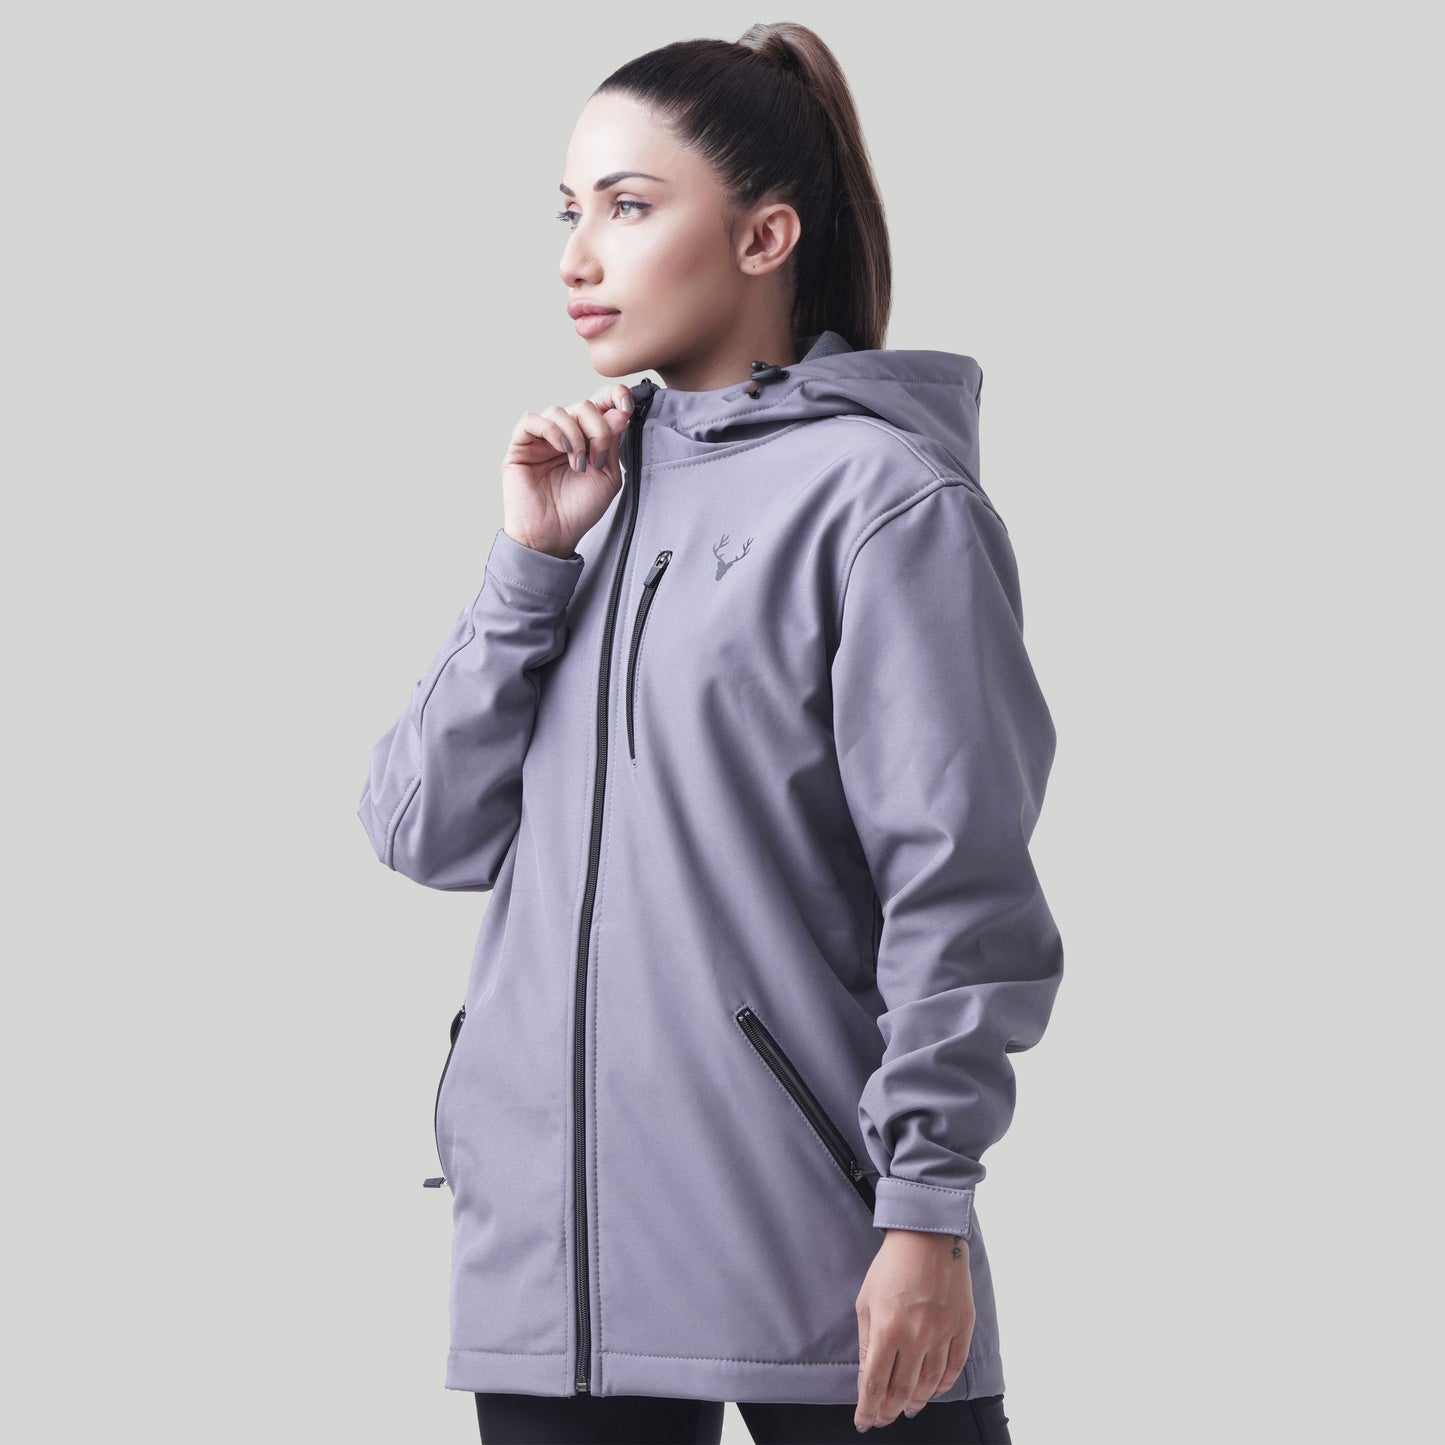 Stag Unisex SoftTech Jacket (Grey)